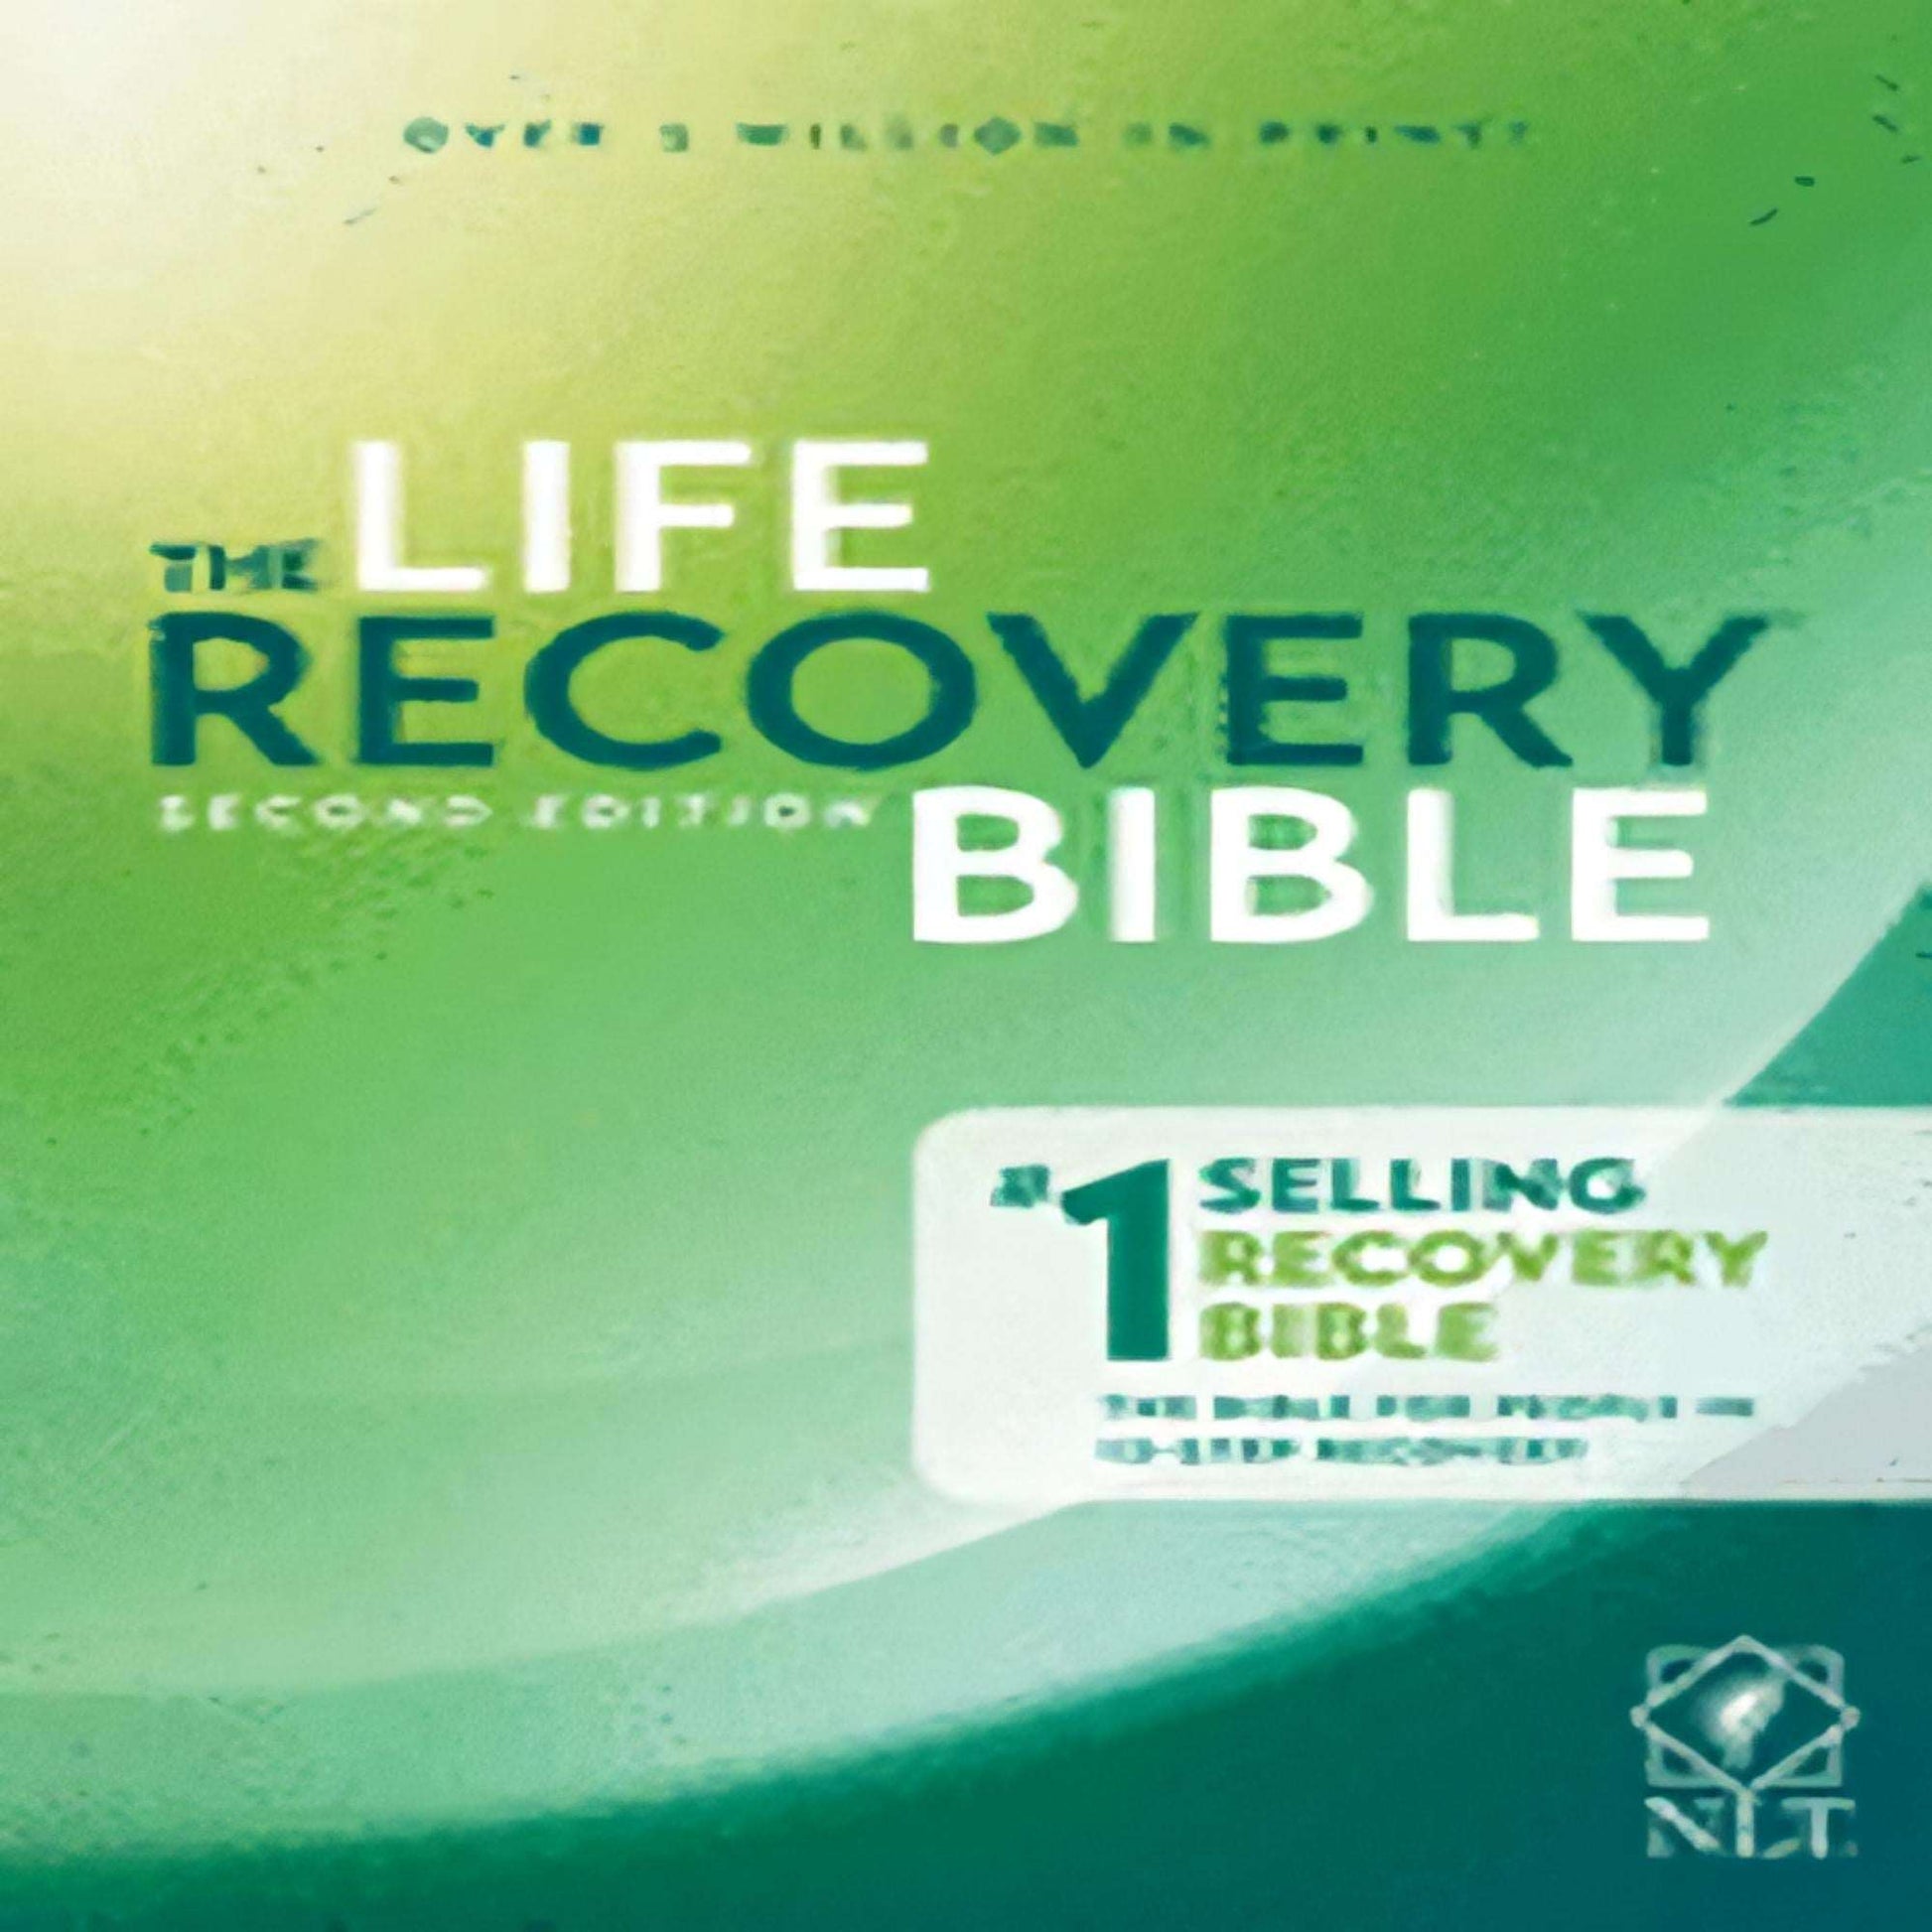 TEXTBOOK The Life Recovery Bible NLT66-021423-1496425766DPGBOOKSTORE.COM. Today's Bestsellers.